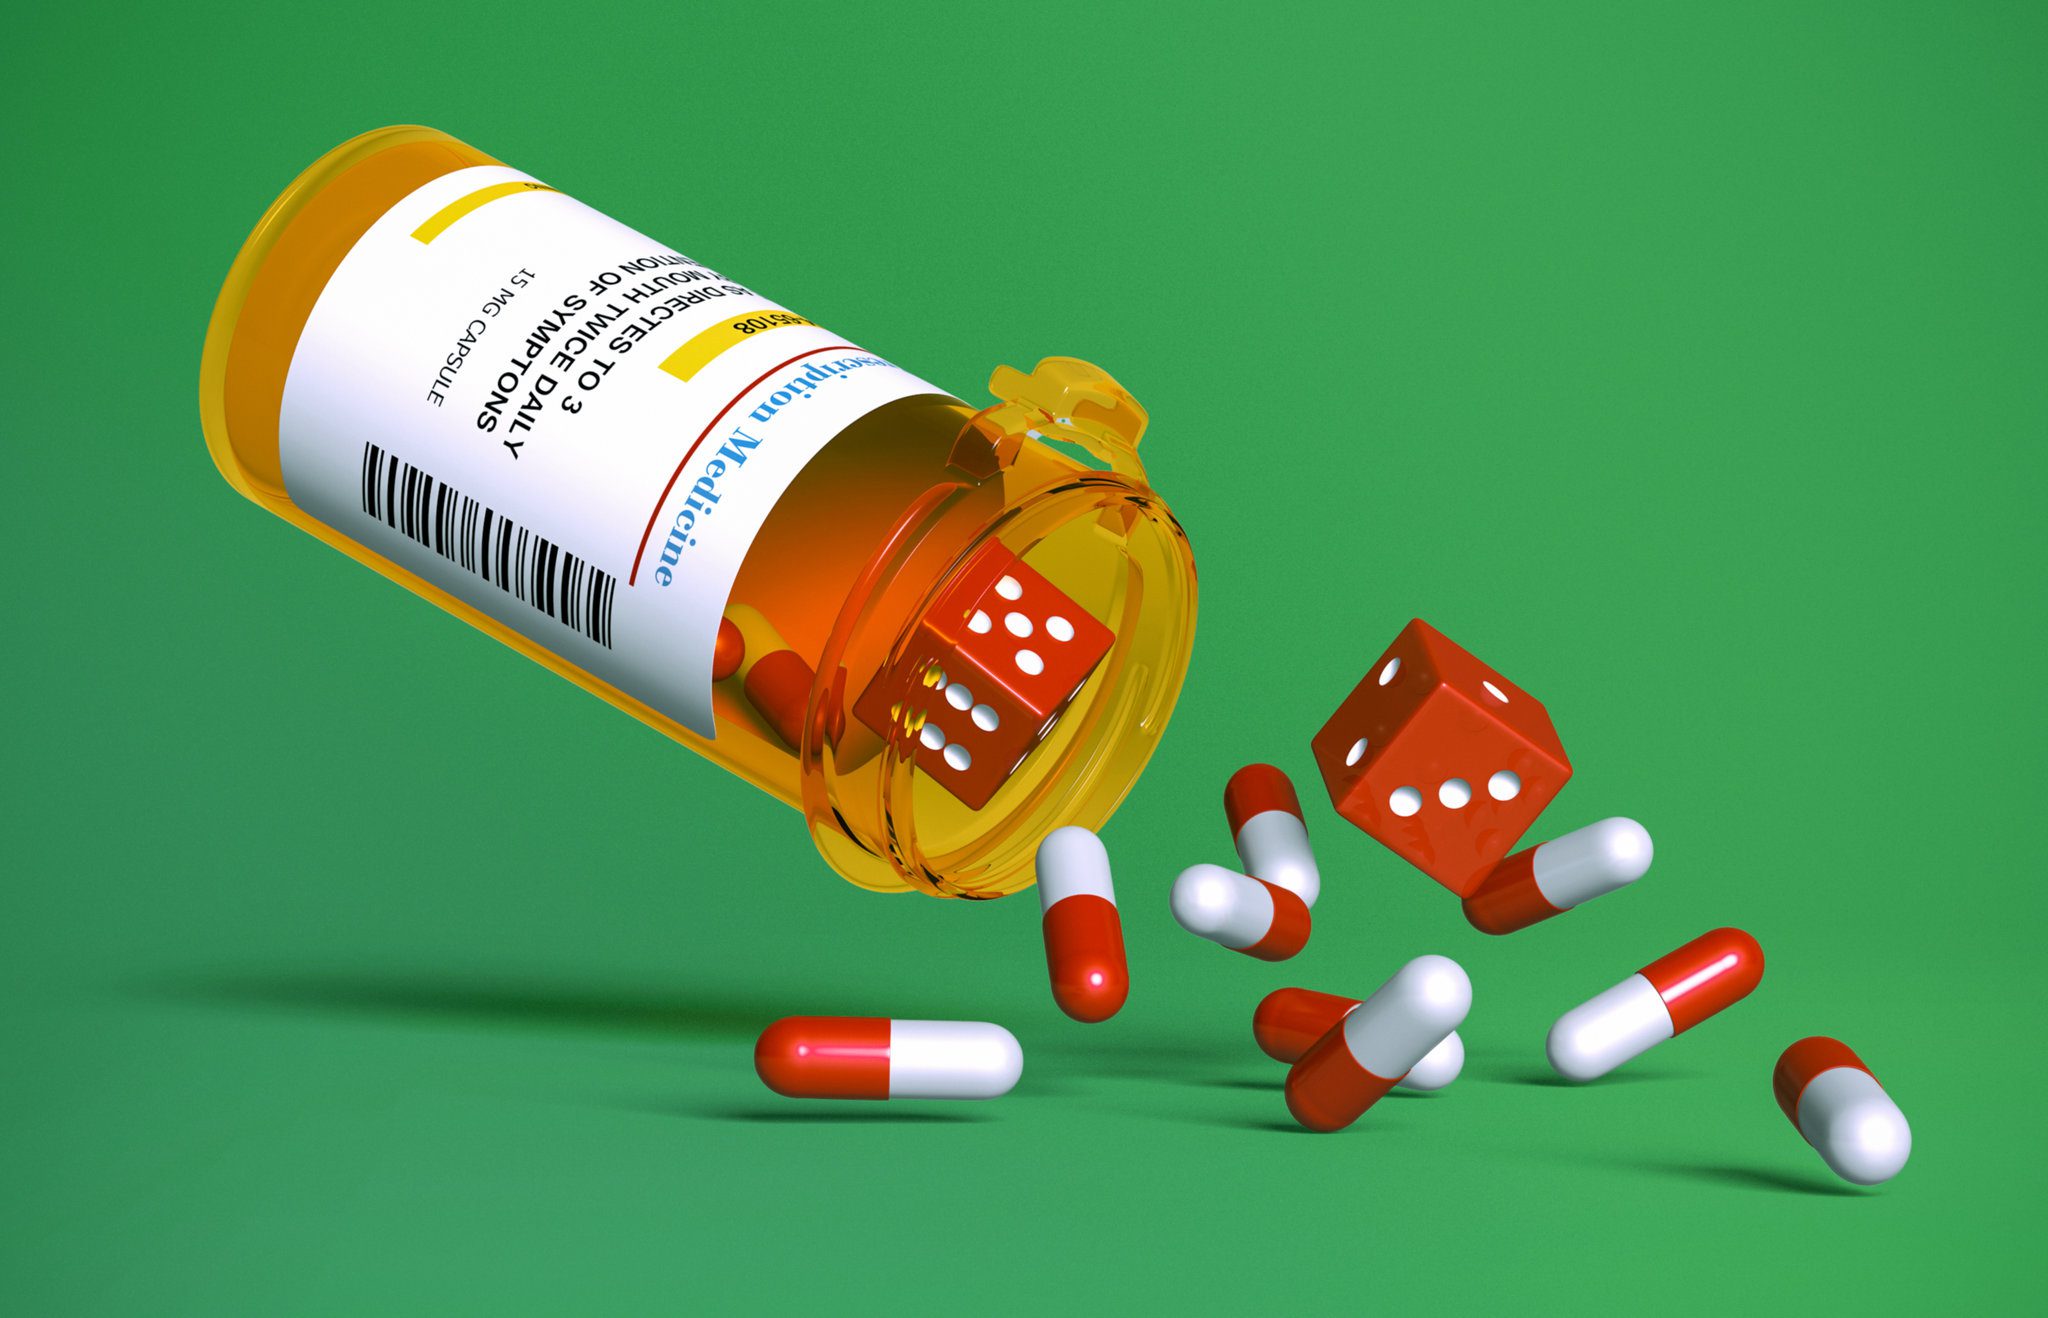 Repurposing Generic Drugs can Reduce Time and Cost to Develop New Treatments